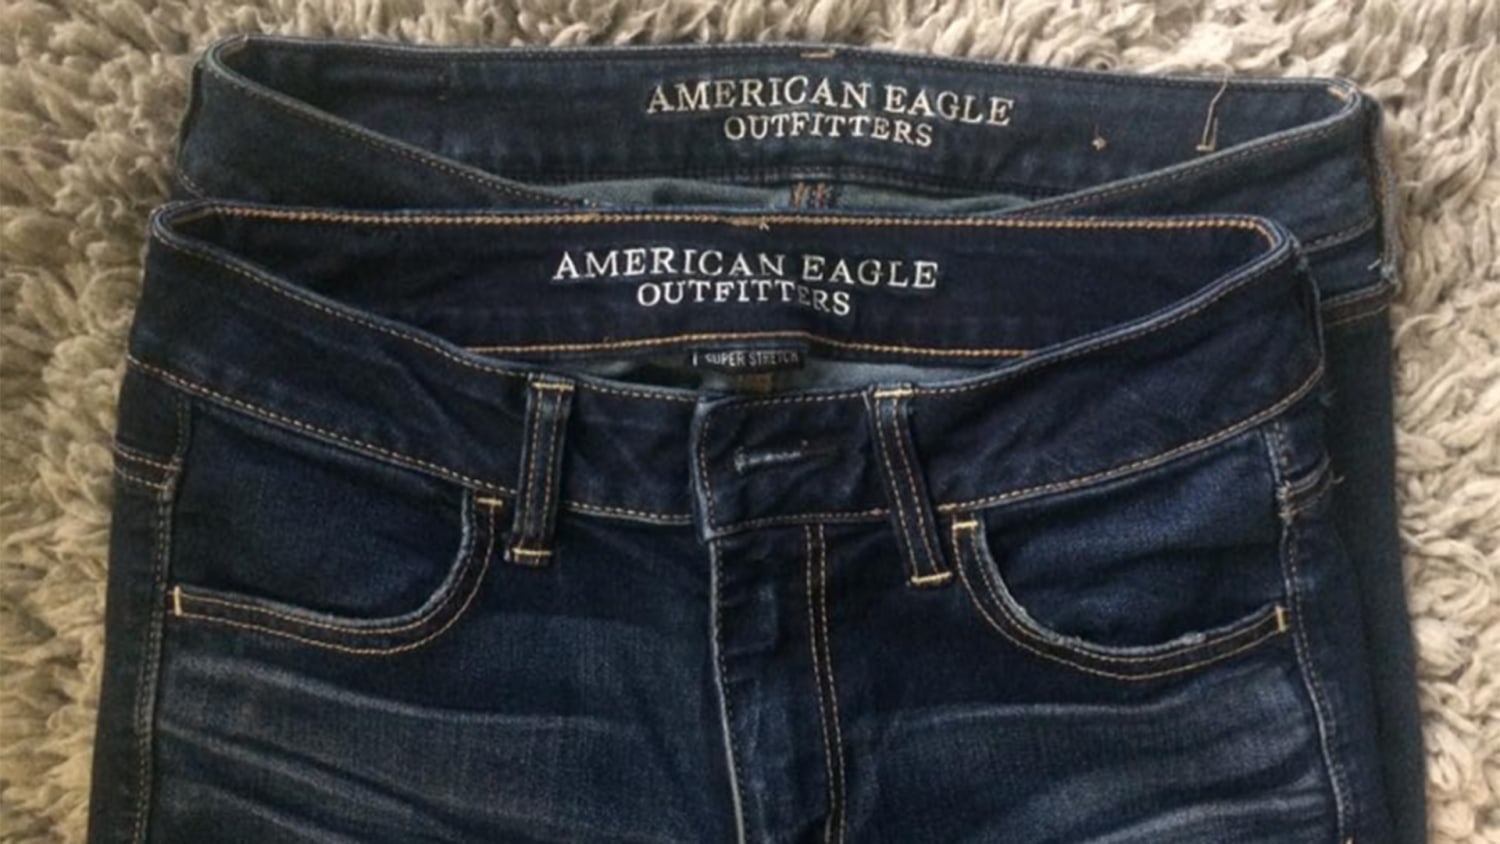 American Eagle Vs. Hollister: Which Store Is Better?